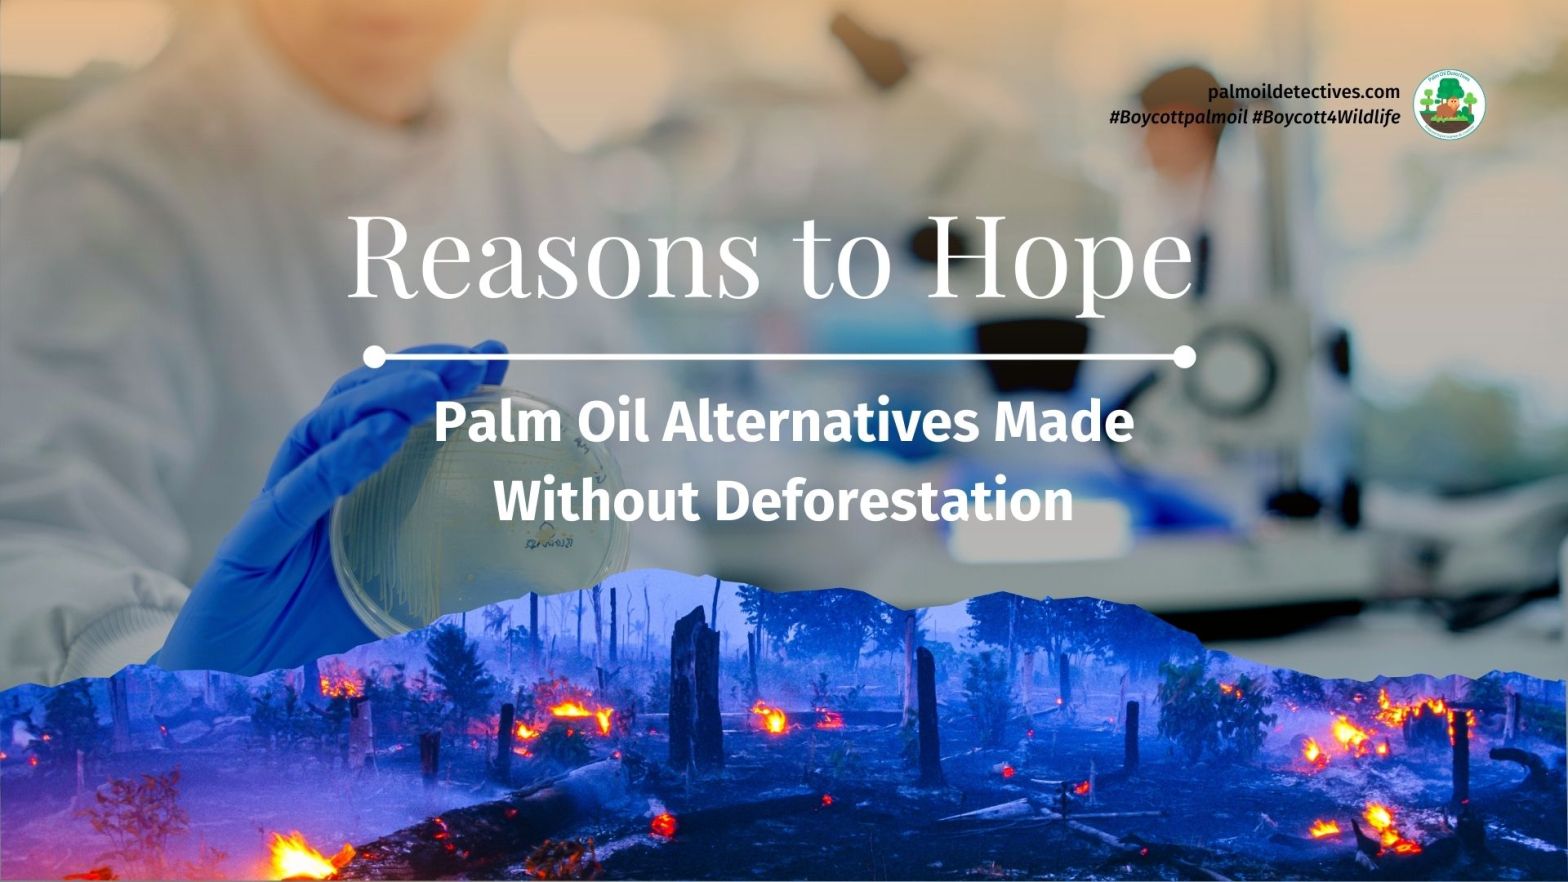 Reason to Hope: Alternatives to palm oil made without deforestation.